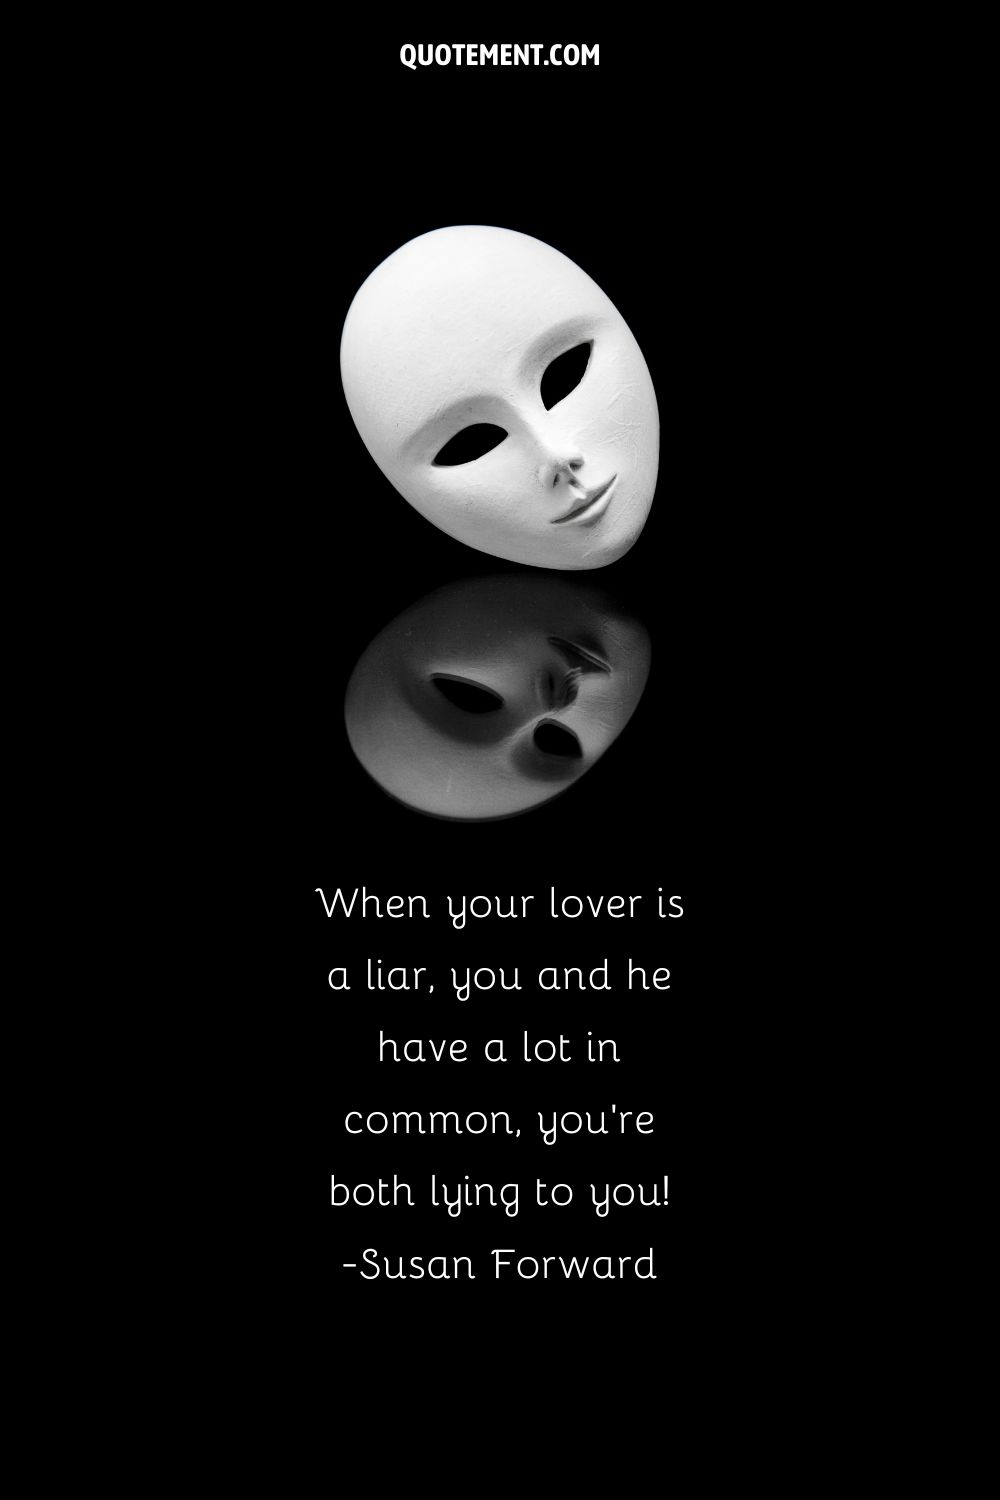 mirroring mask image representing life quote on being lied to by someone you love
